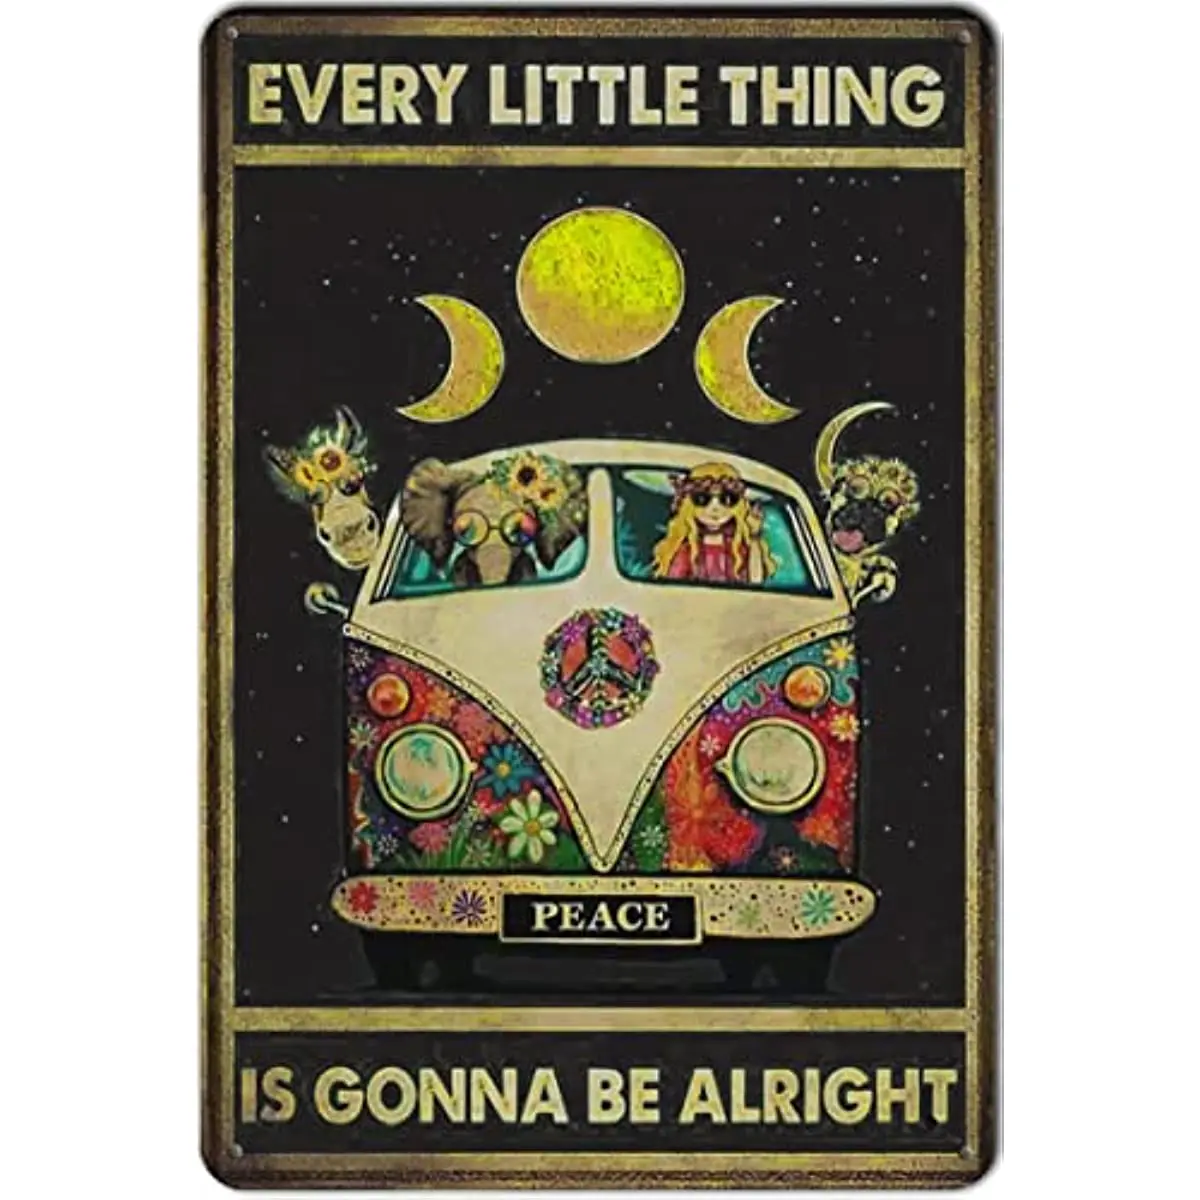 

New Funny Hippie Room Decor Every Little Thing Is Gonna Be Alright Retro Metal Tin Sign Wall Art Posters Hippie Gifts Man Cave